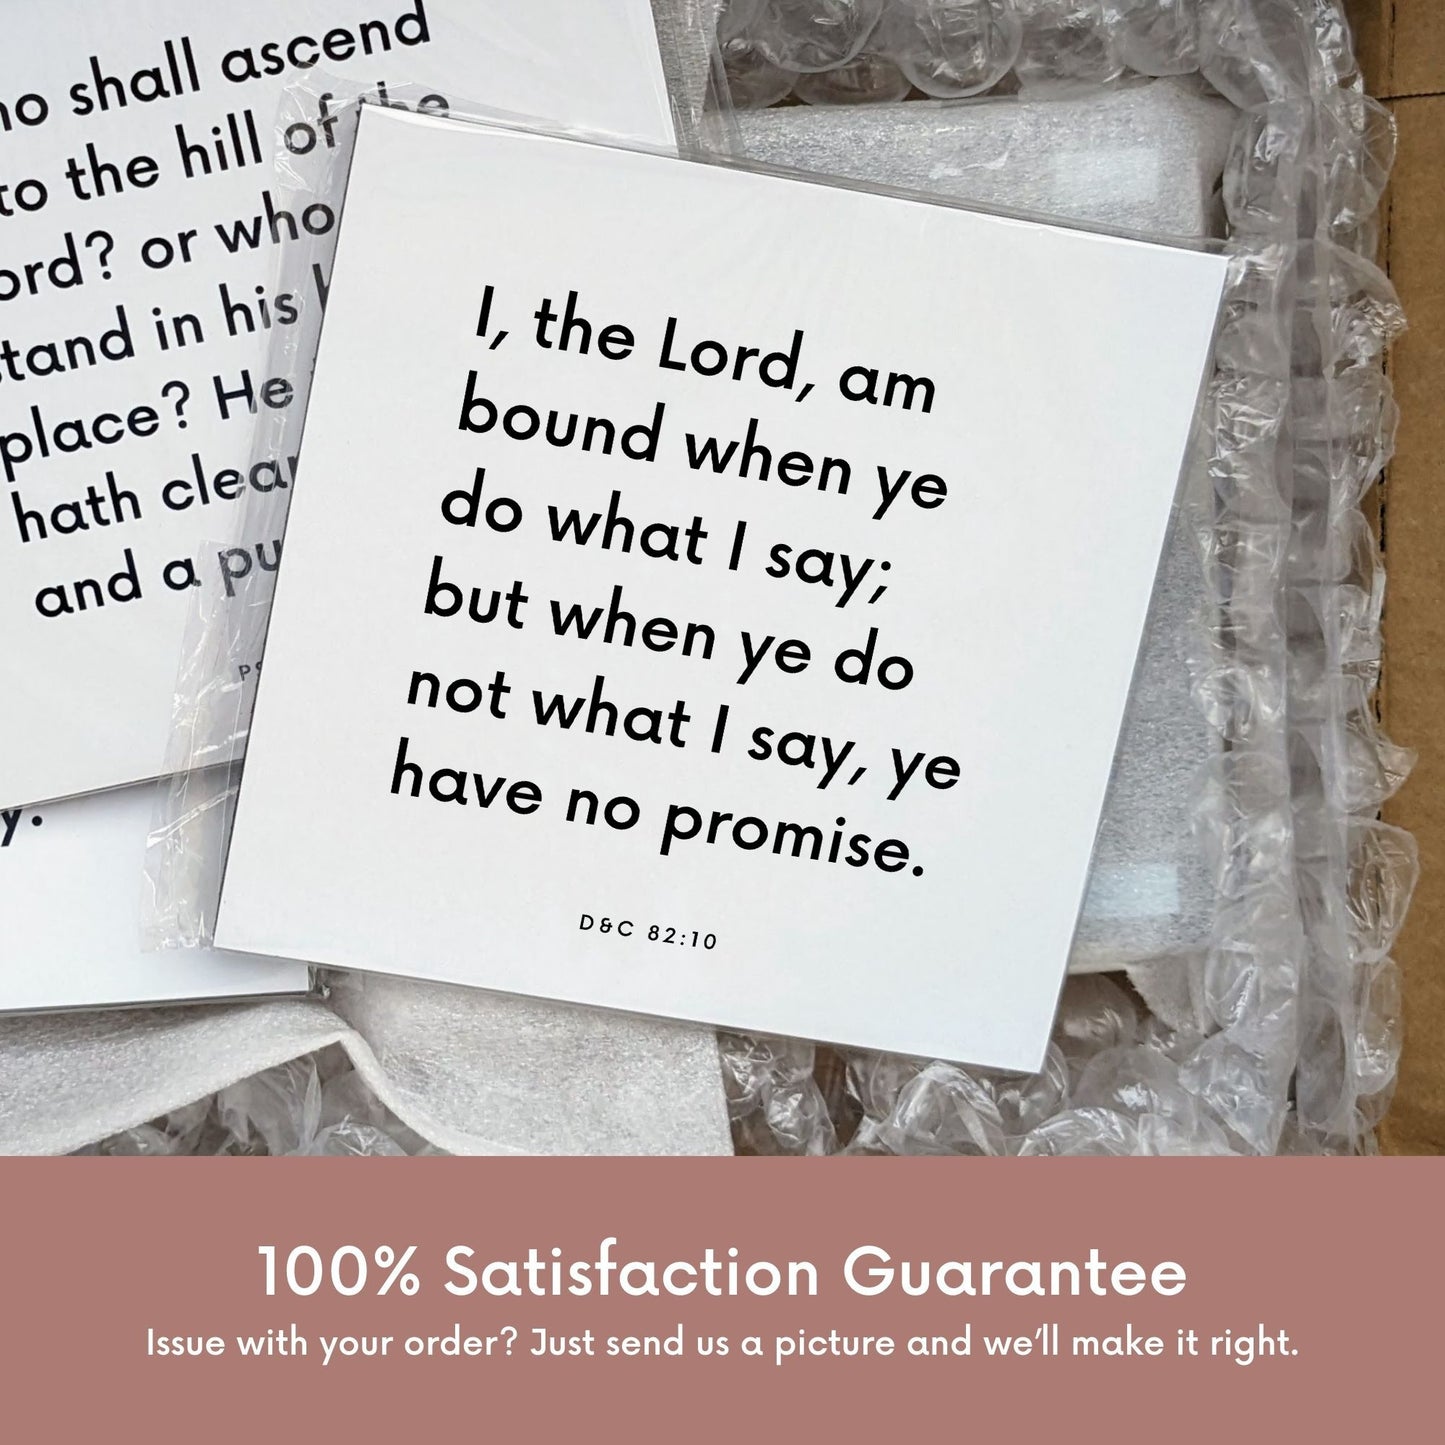 Shipping materials for scripture tile of D&C 82:10 - "I, the Lord, am bound when ye do what I say"